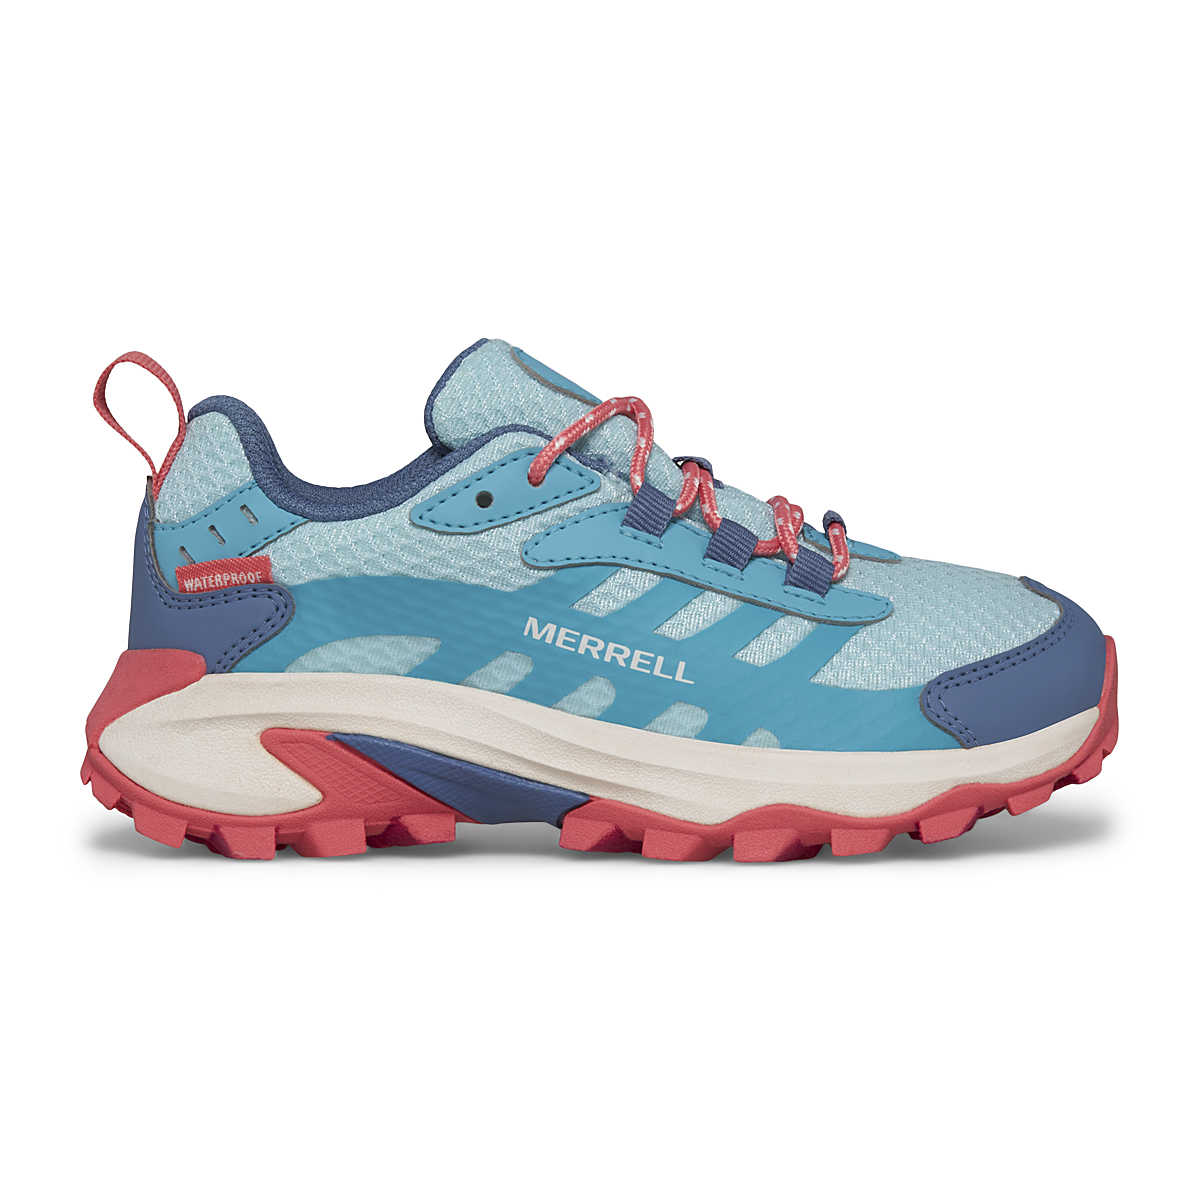 Moab Speed 2 Low Waterproof, Turquoise/Coral, dynamic 1